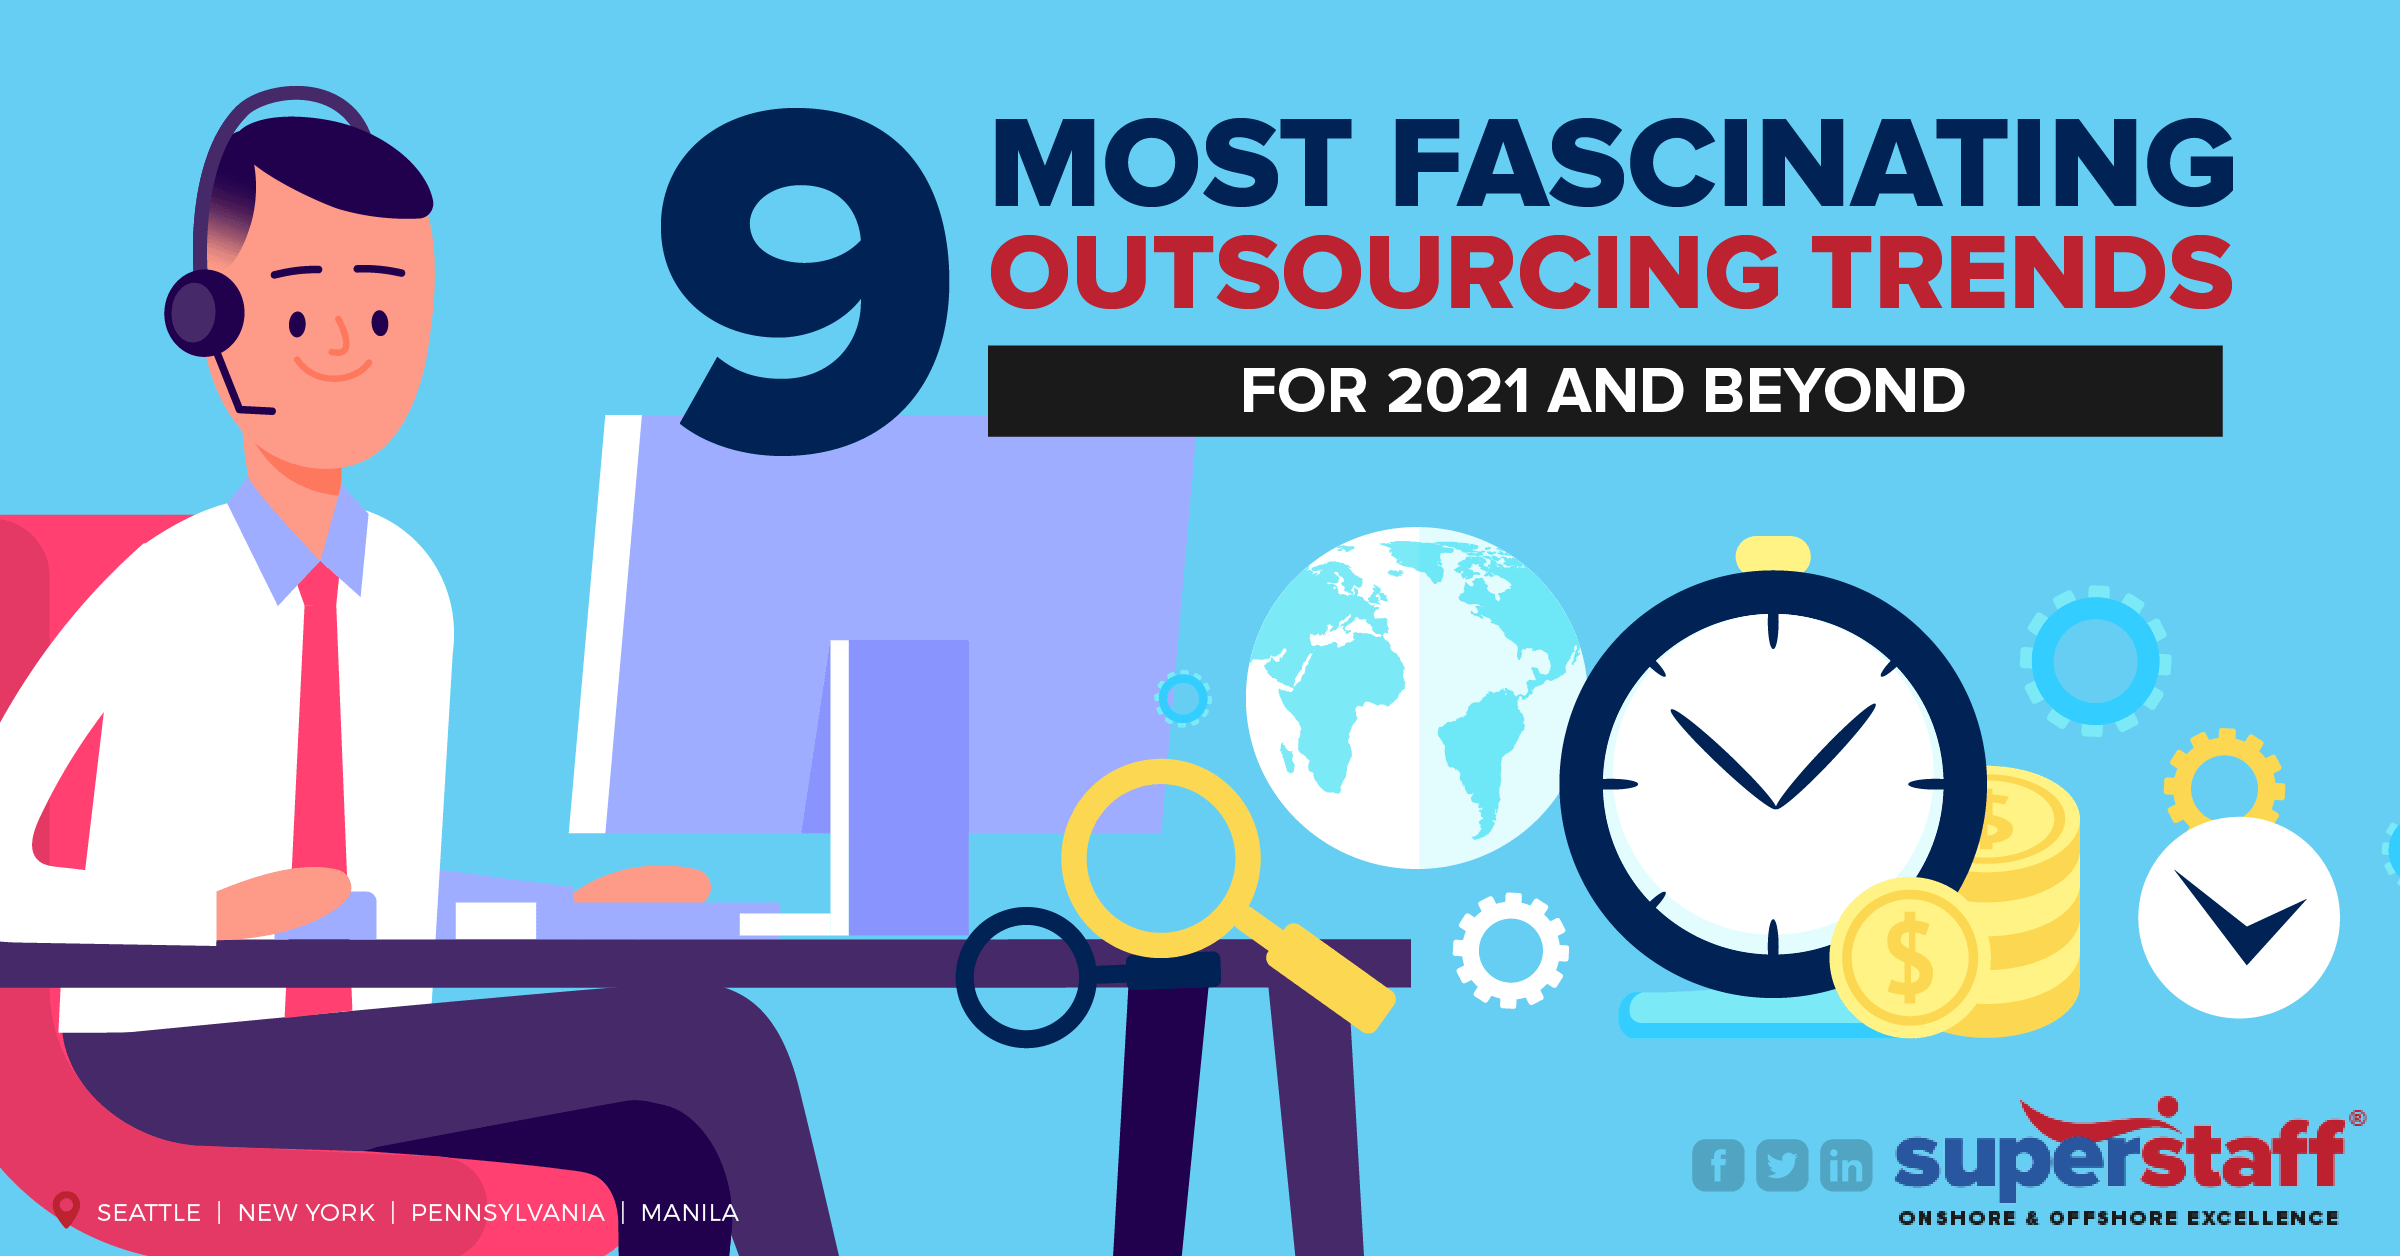 9 Fascinating Outsourcing Trends for 2021 and Beyond